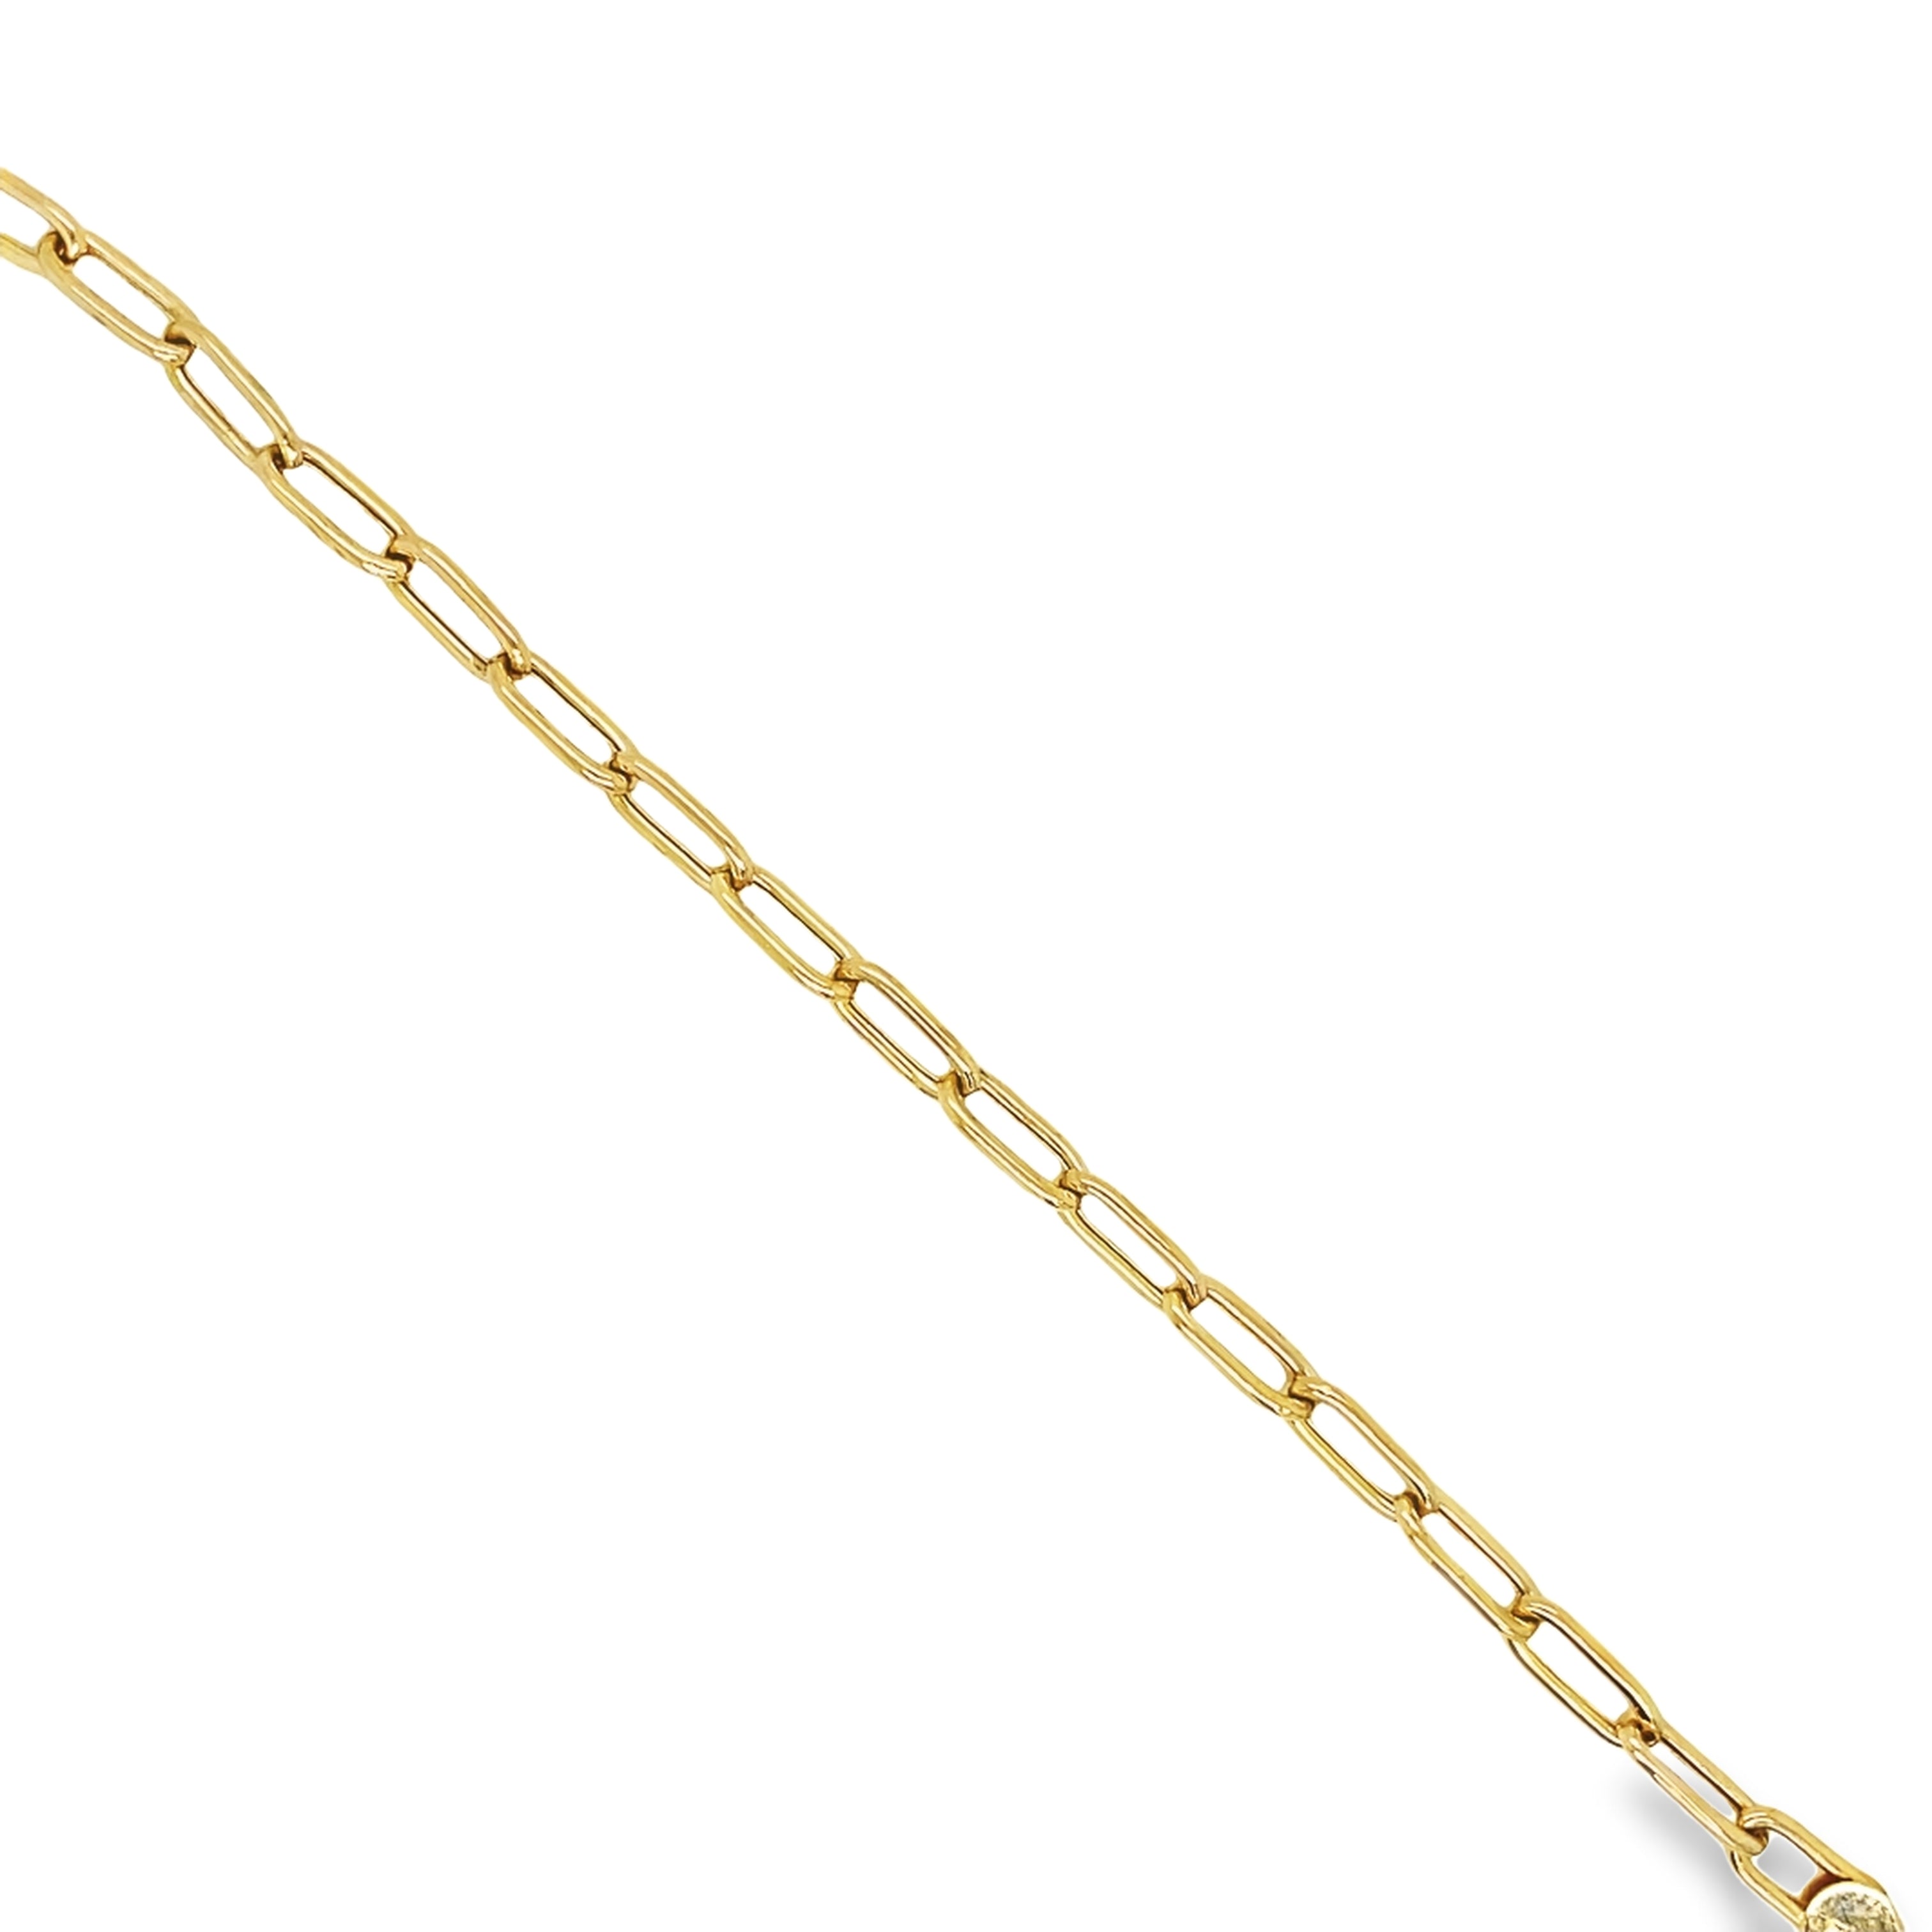 This elegant 14K Yellow Gold Paper Clip Bracelet is an exquisite addition to any jewelry collection. Crafted with Italian precision, wide design is perfect for those who appreciate classic style. 7" long&nbsp;